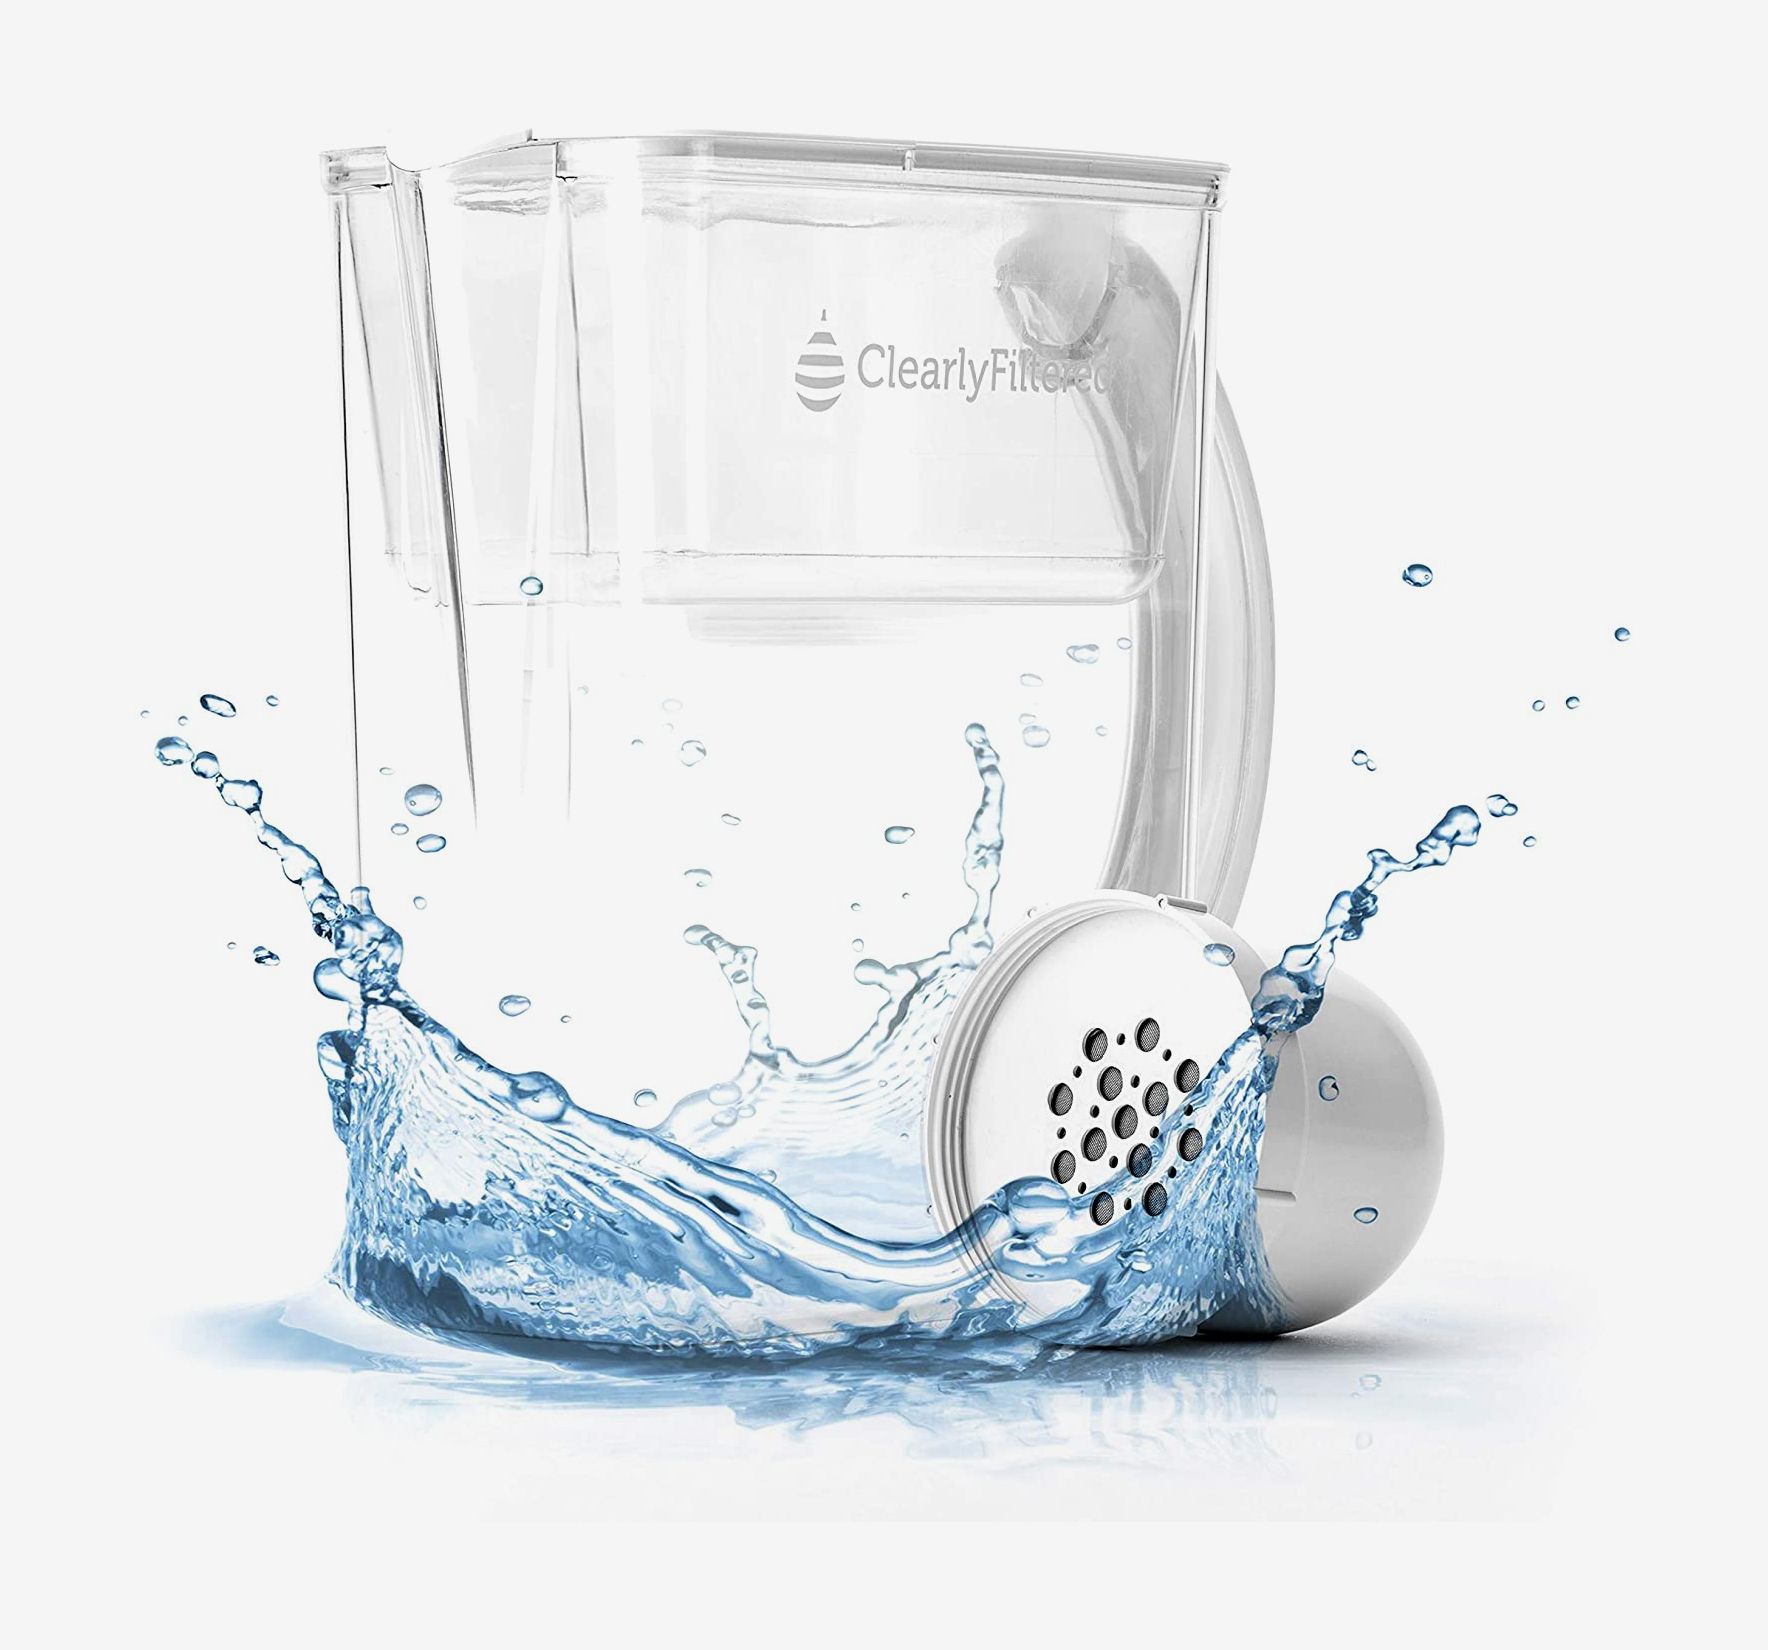 Best Water Pitcher Filters - Based on 3rd Party Laboratory Testing